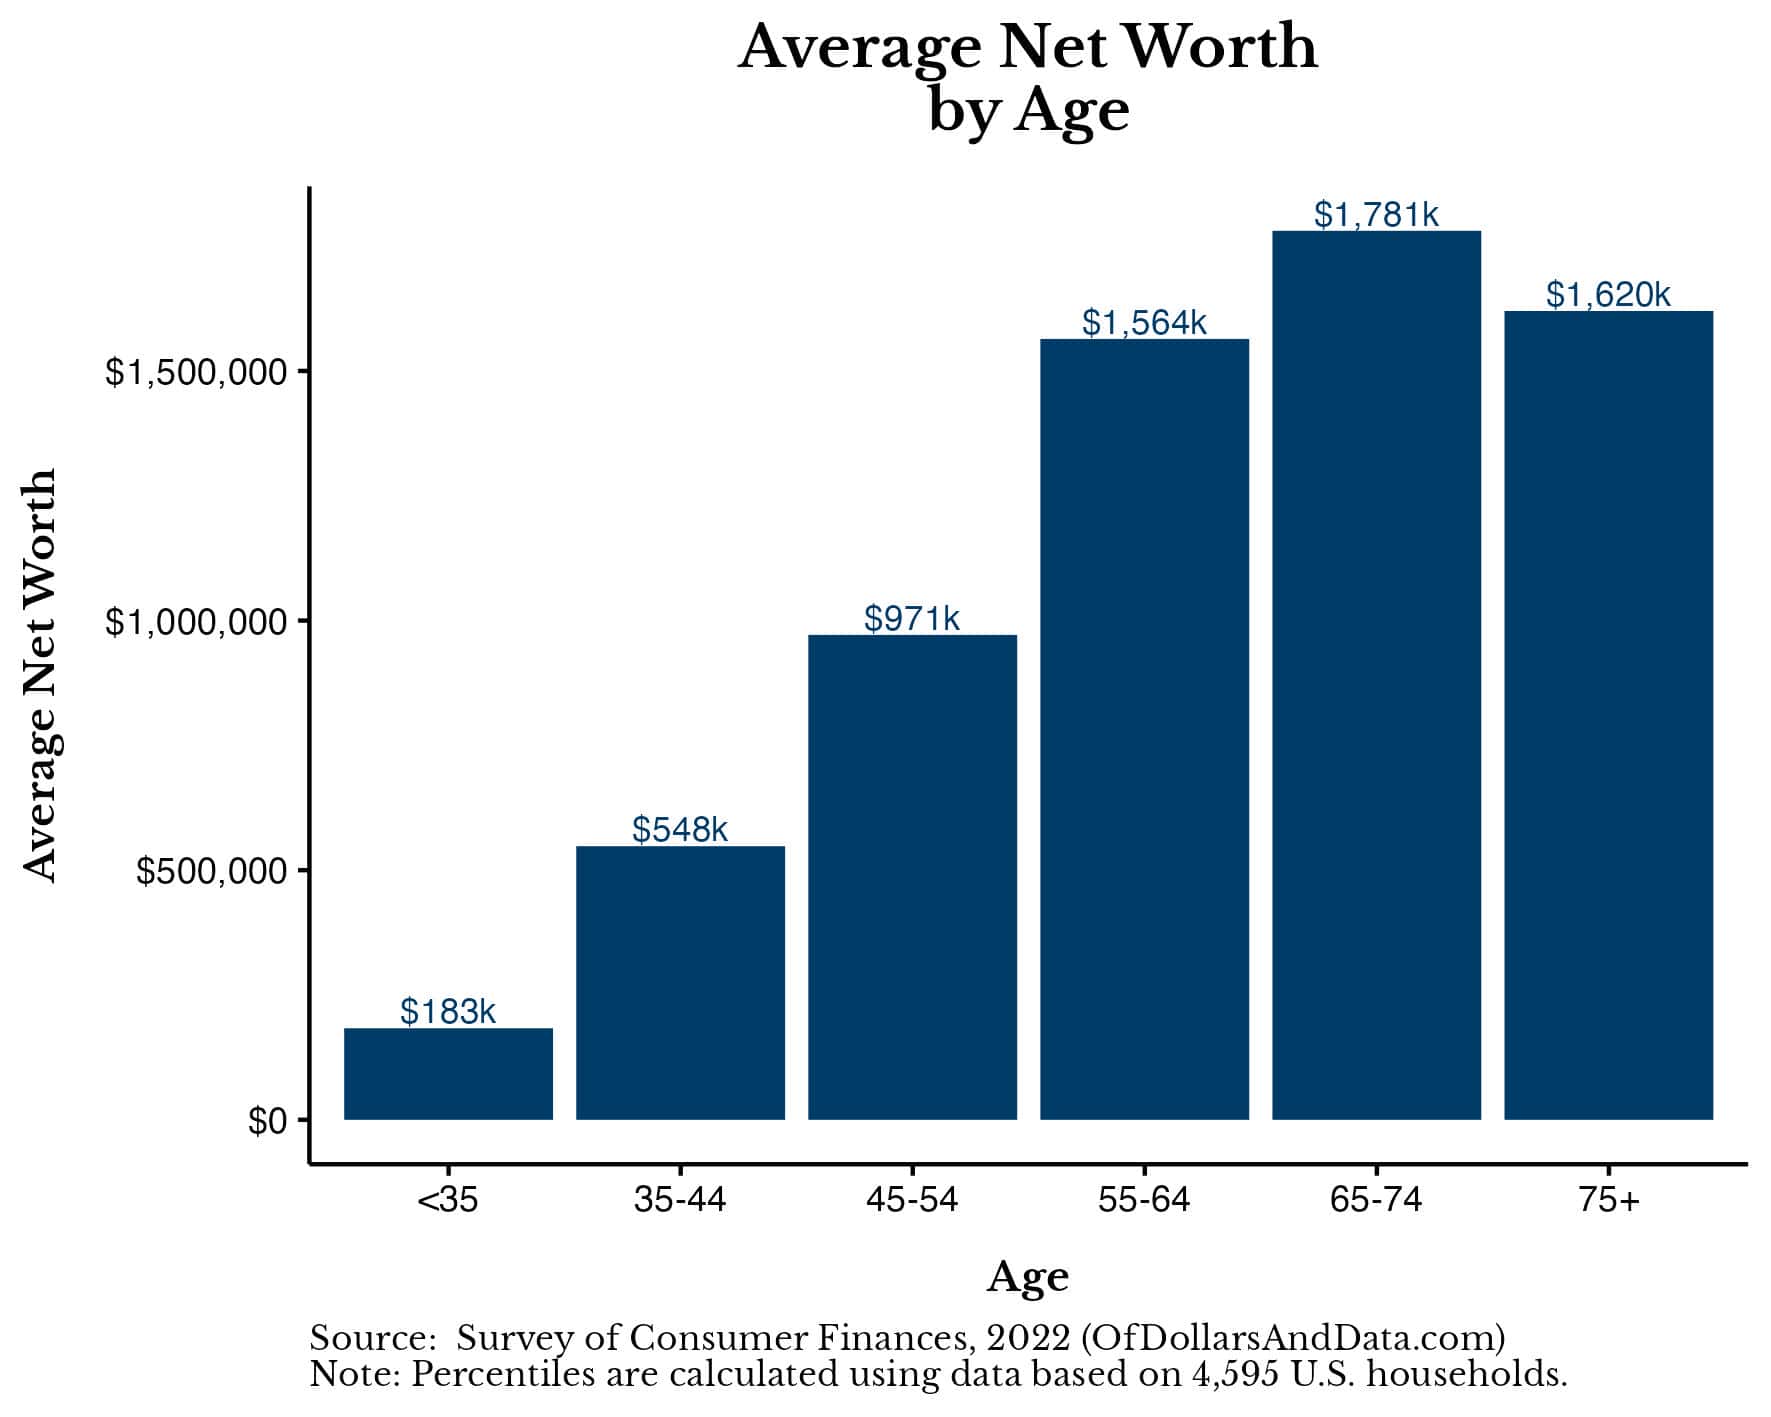 Chart showing the average net worth by age in the Survey of Consumer Finances 2022 data from the Federal Reserve.